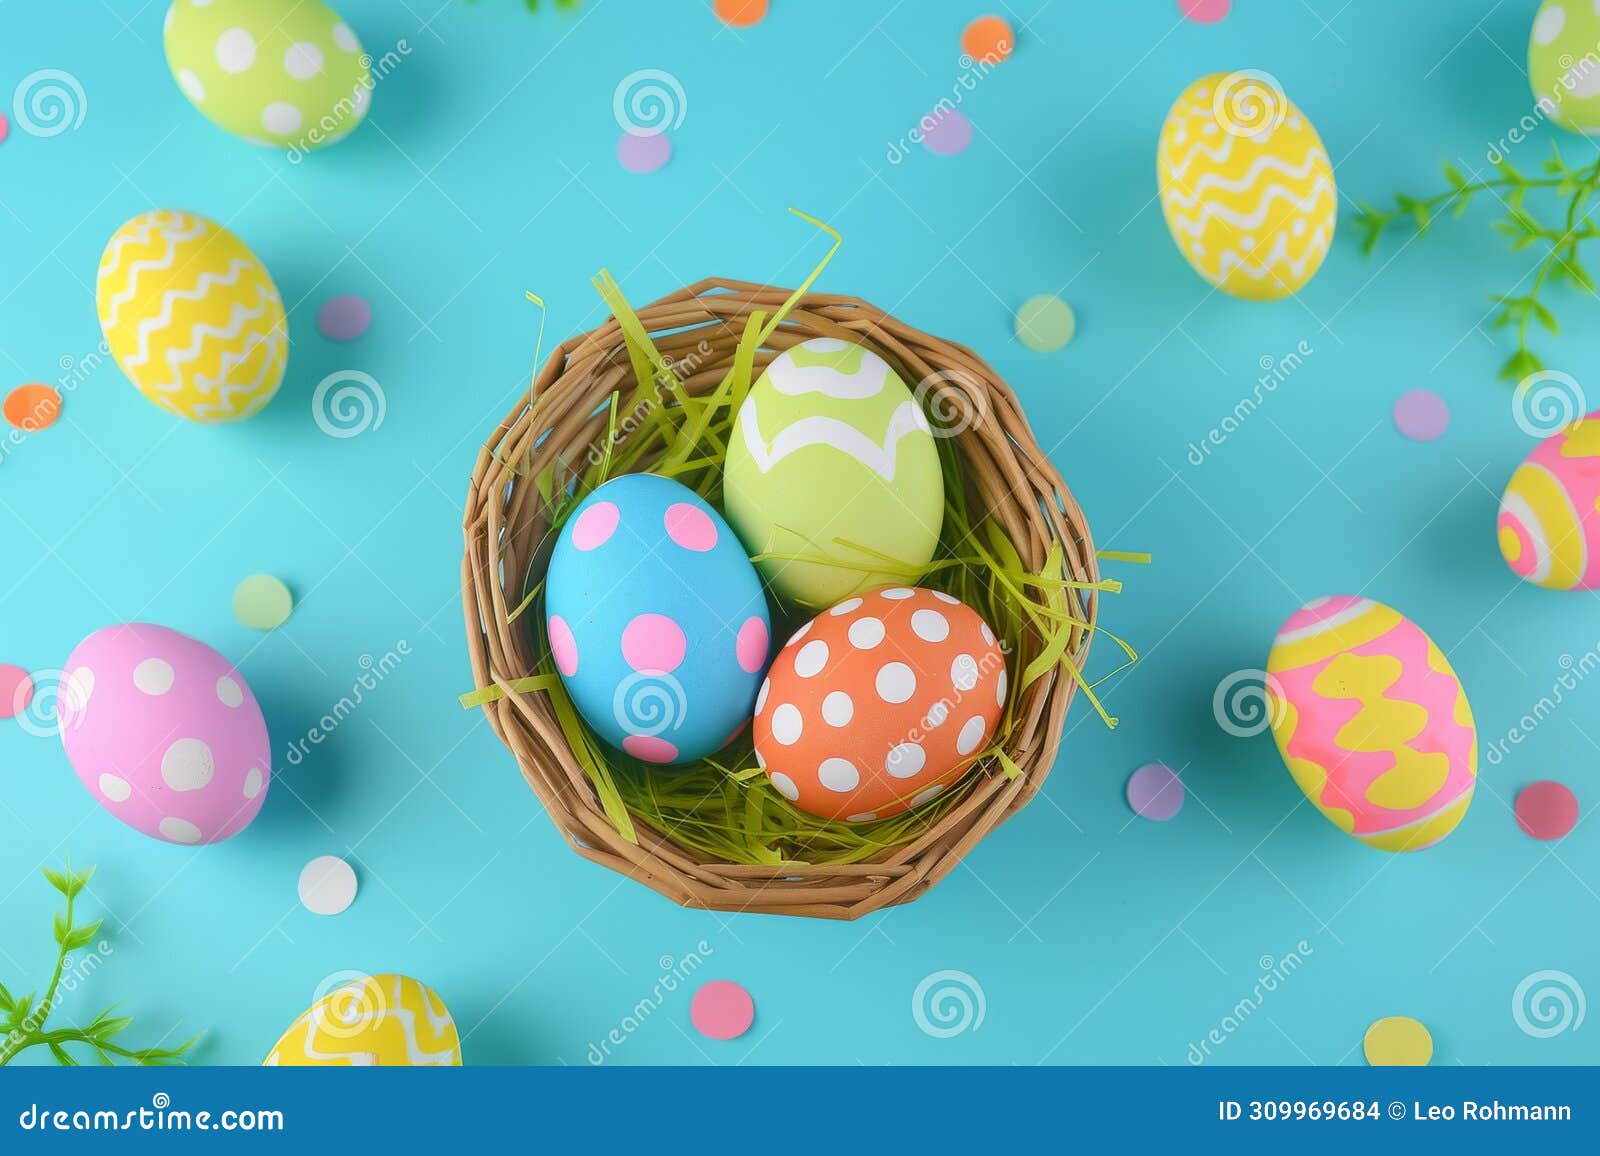 happy easter foxgloves eggs animated basket. white bunny mittens bunny festive feasts. glyph background wallpaper